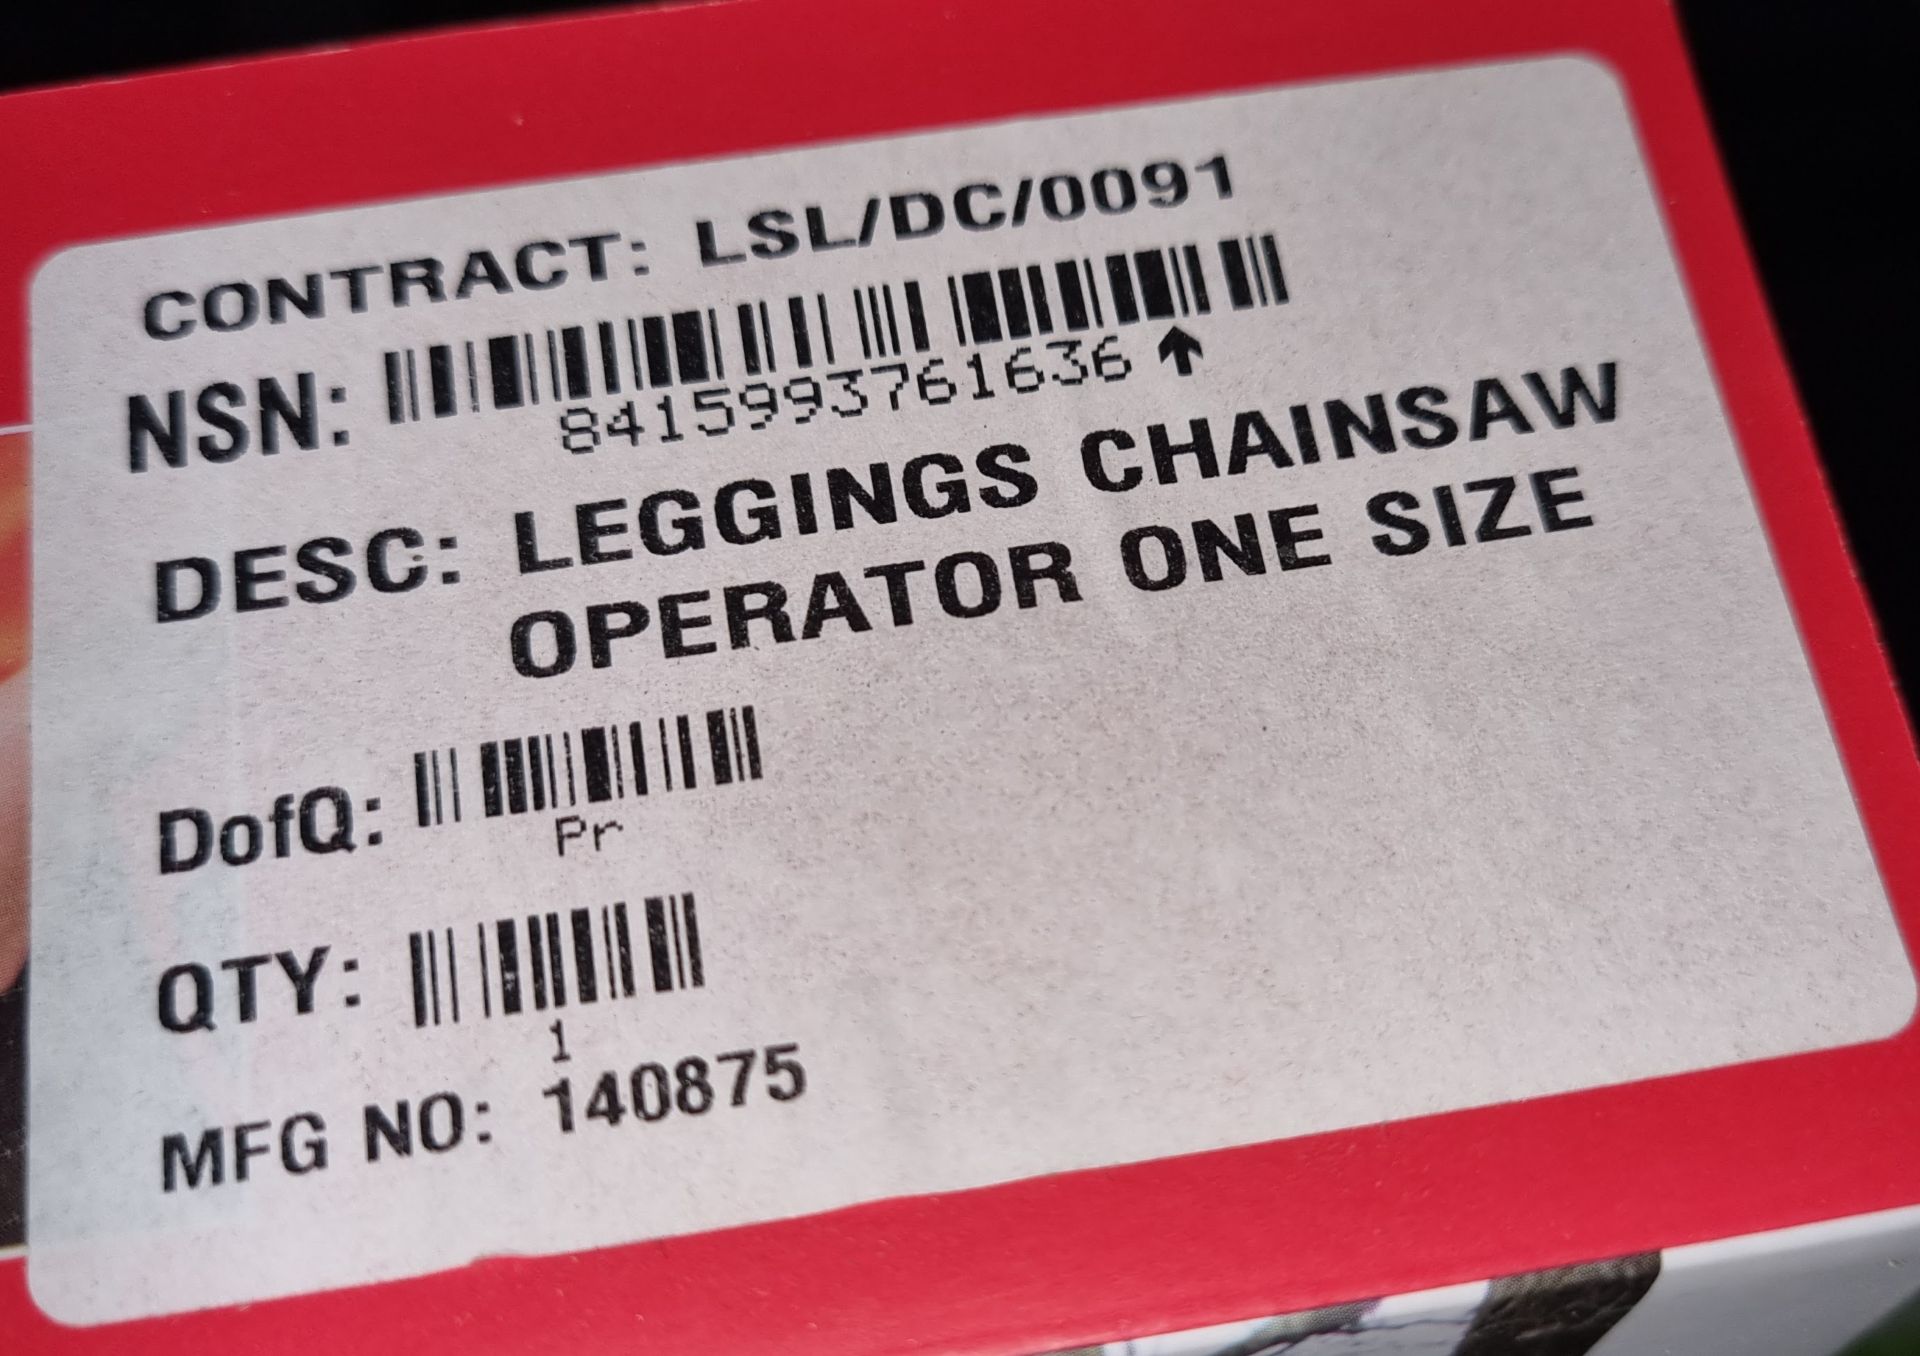 3x pairs of Oregon chainsaw protection leggings - new / boxed - Image 2 of 4